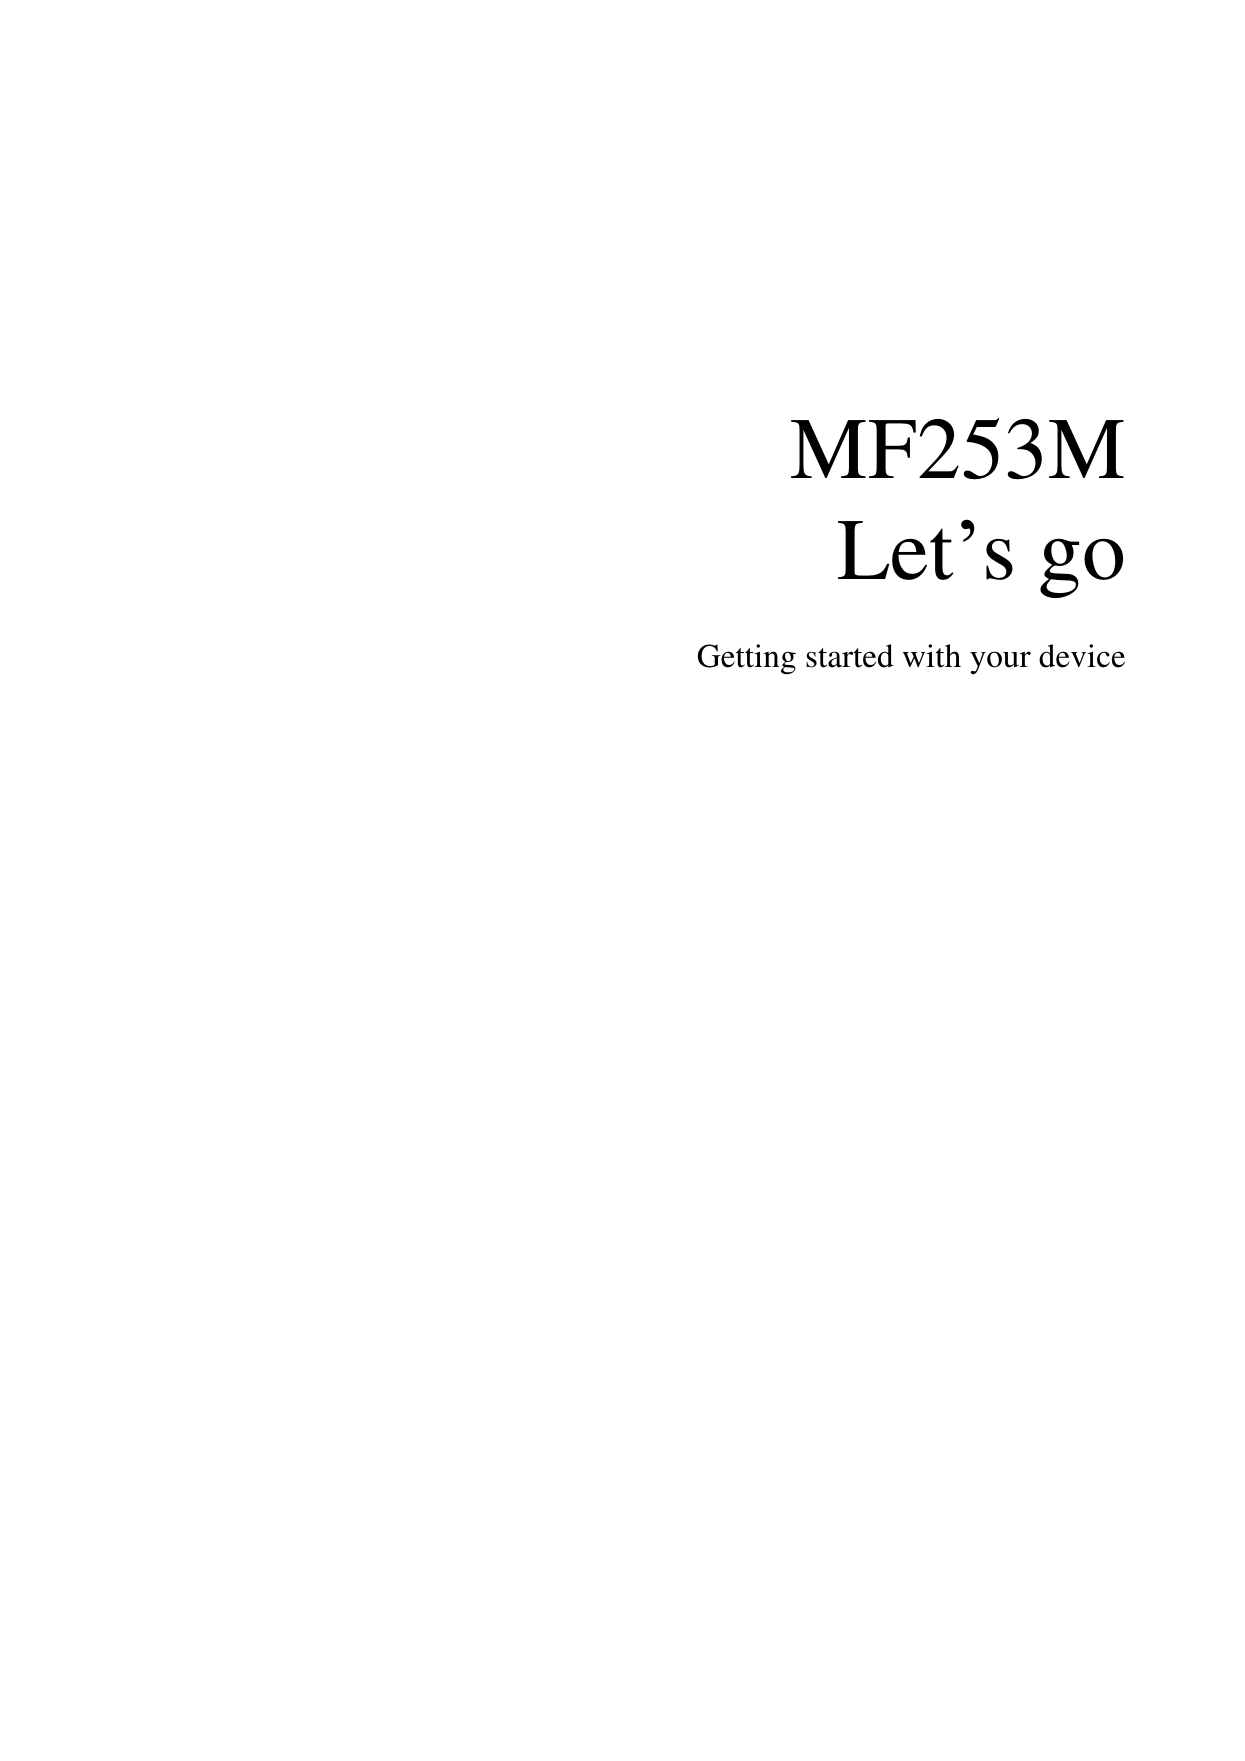                        MF253M     Let’s go  Getting started with your device                            